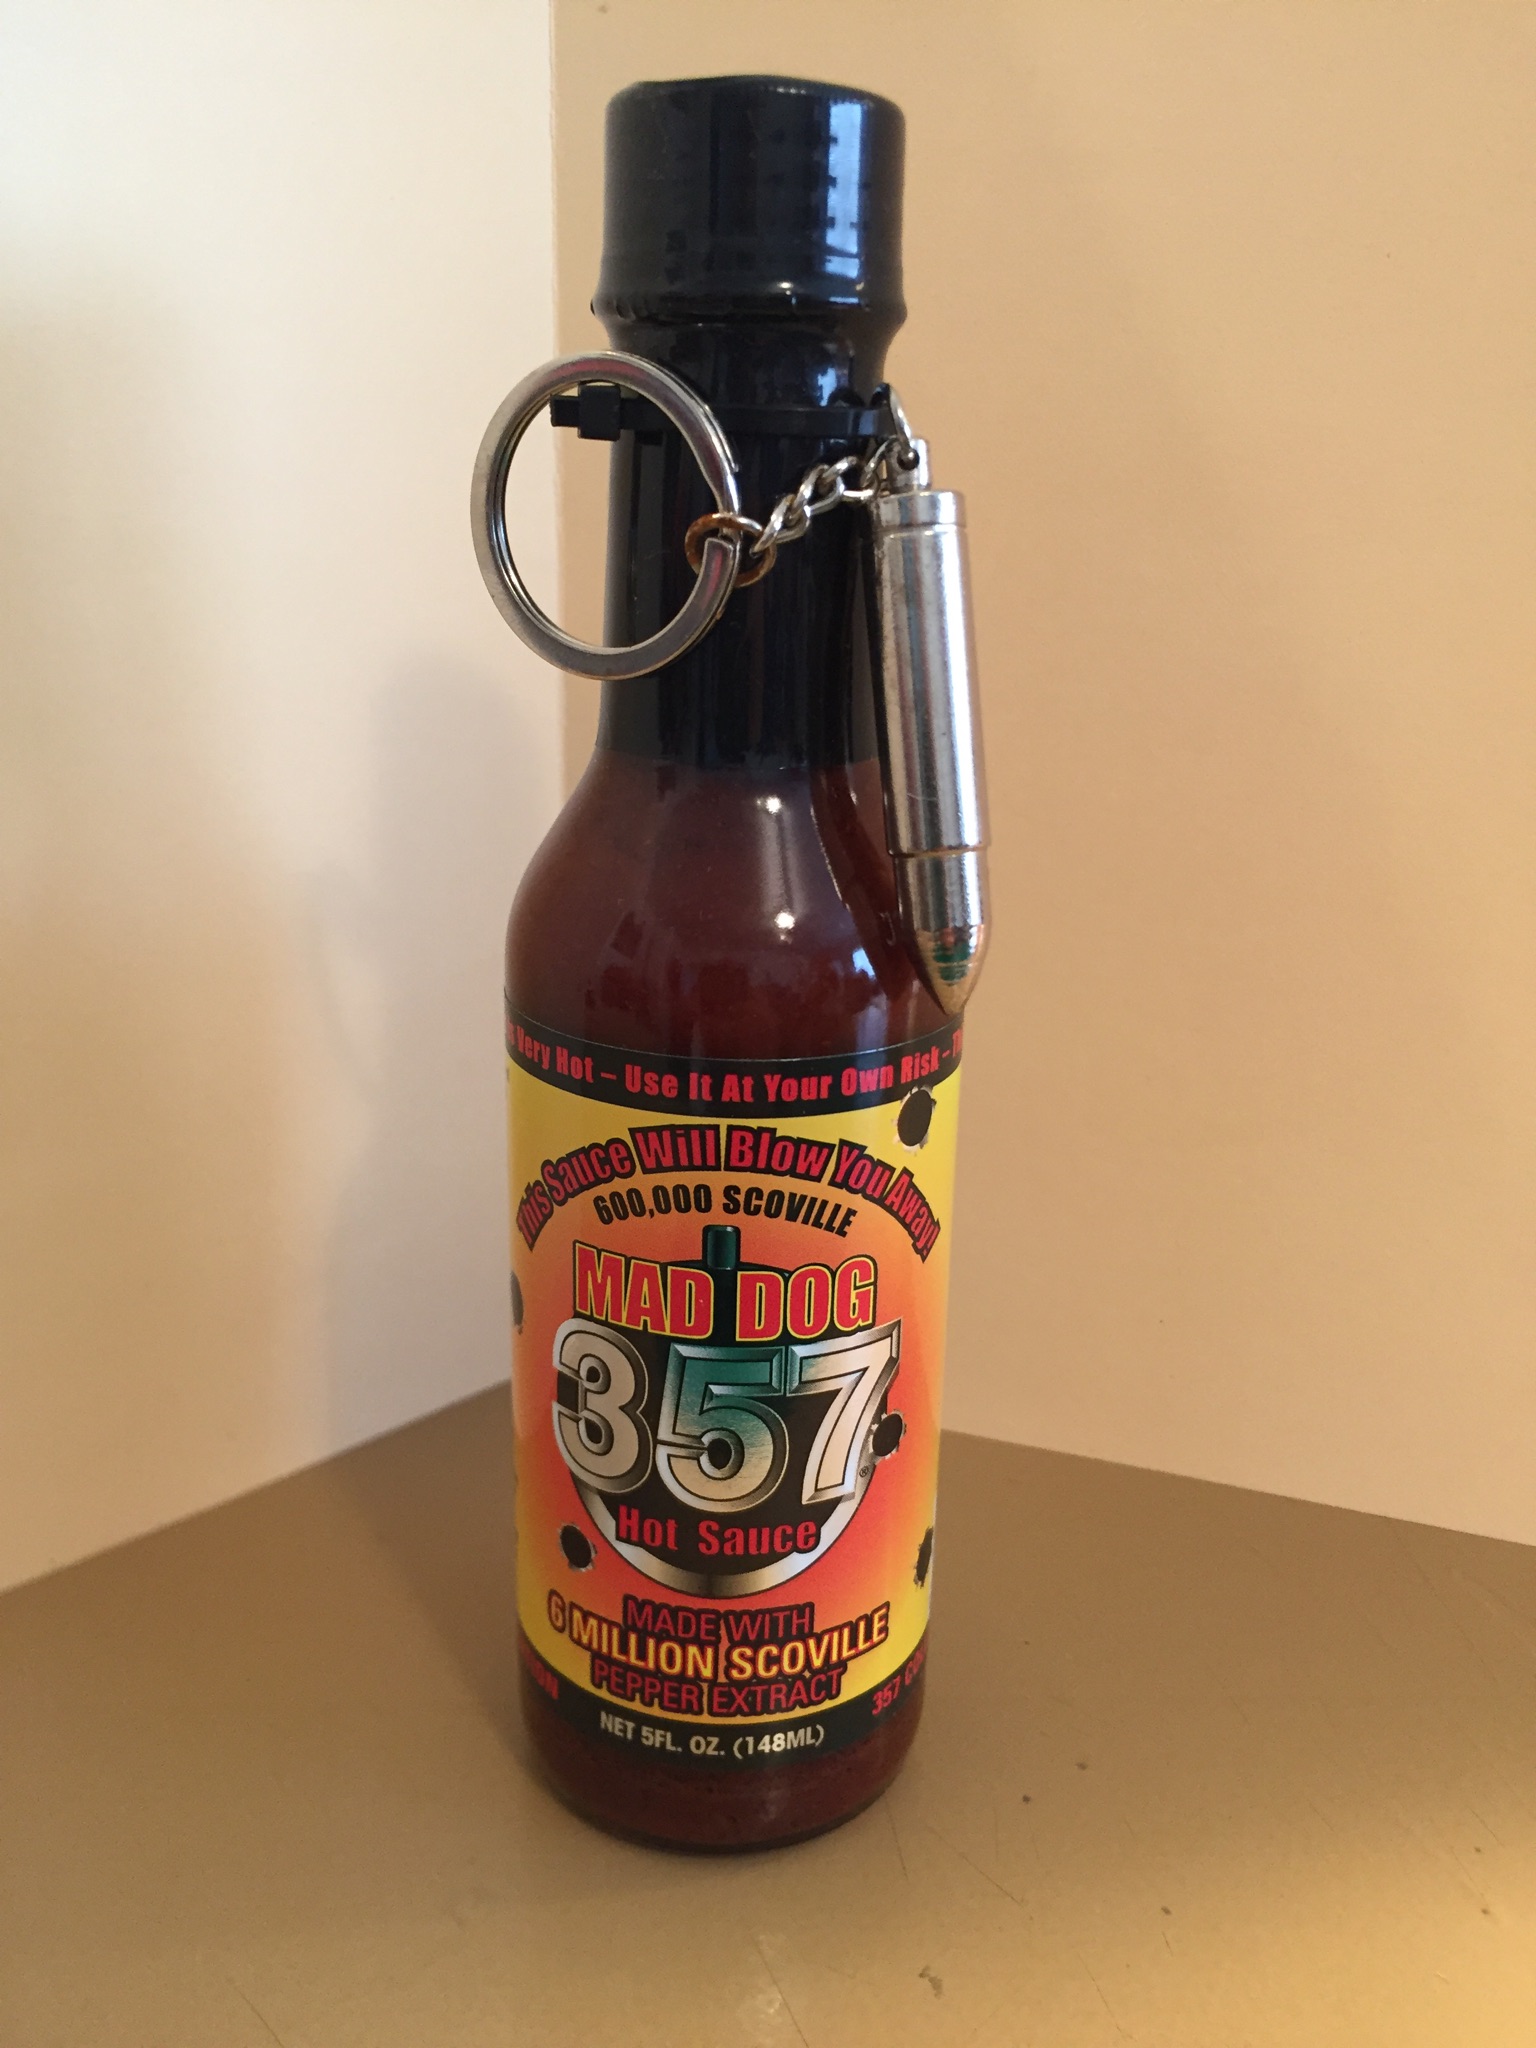 Mad Dog 357 Private Collection Hot Sauce 6m Shu 5oz Scorched Lizard Sauces